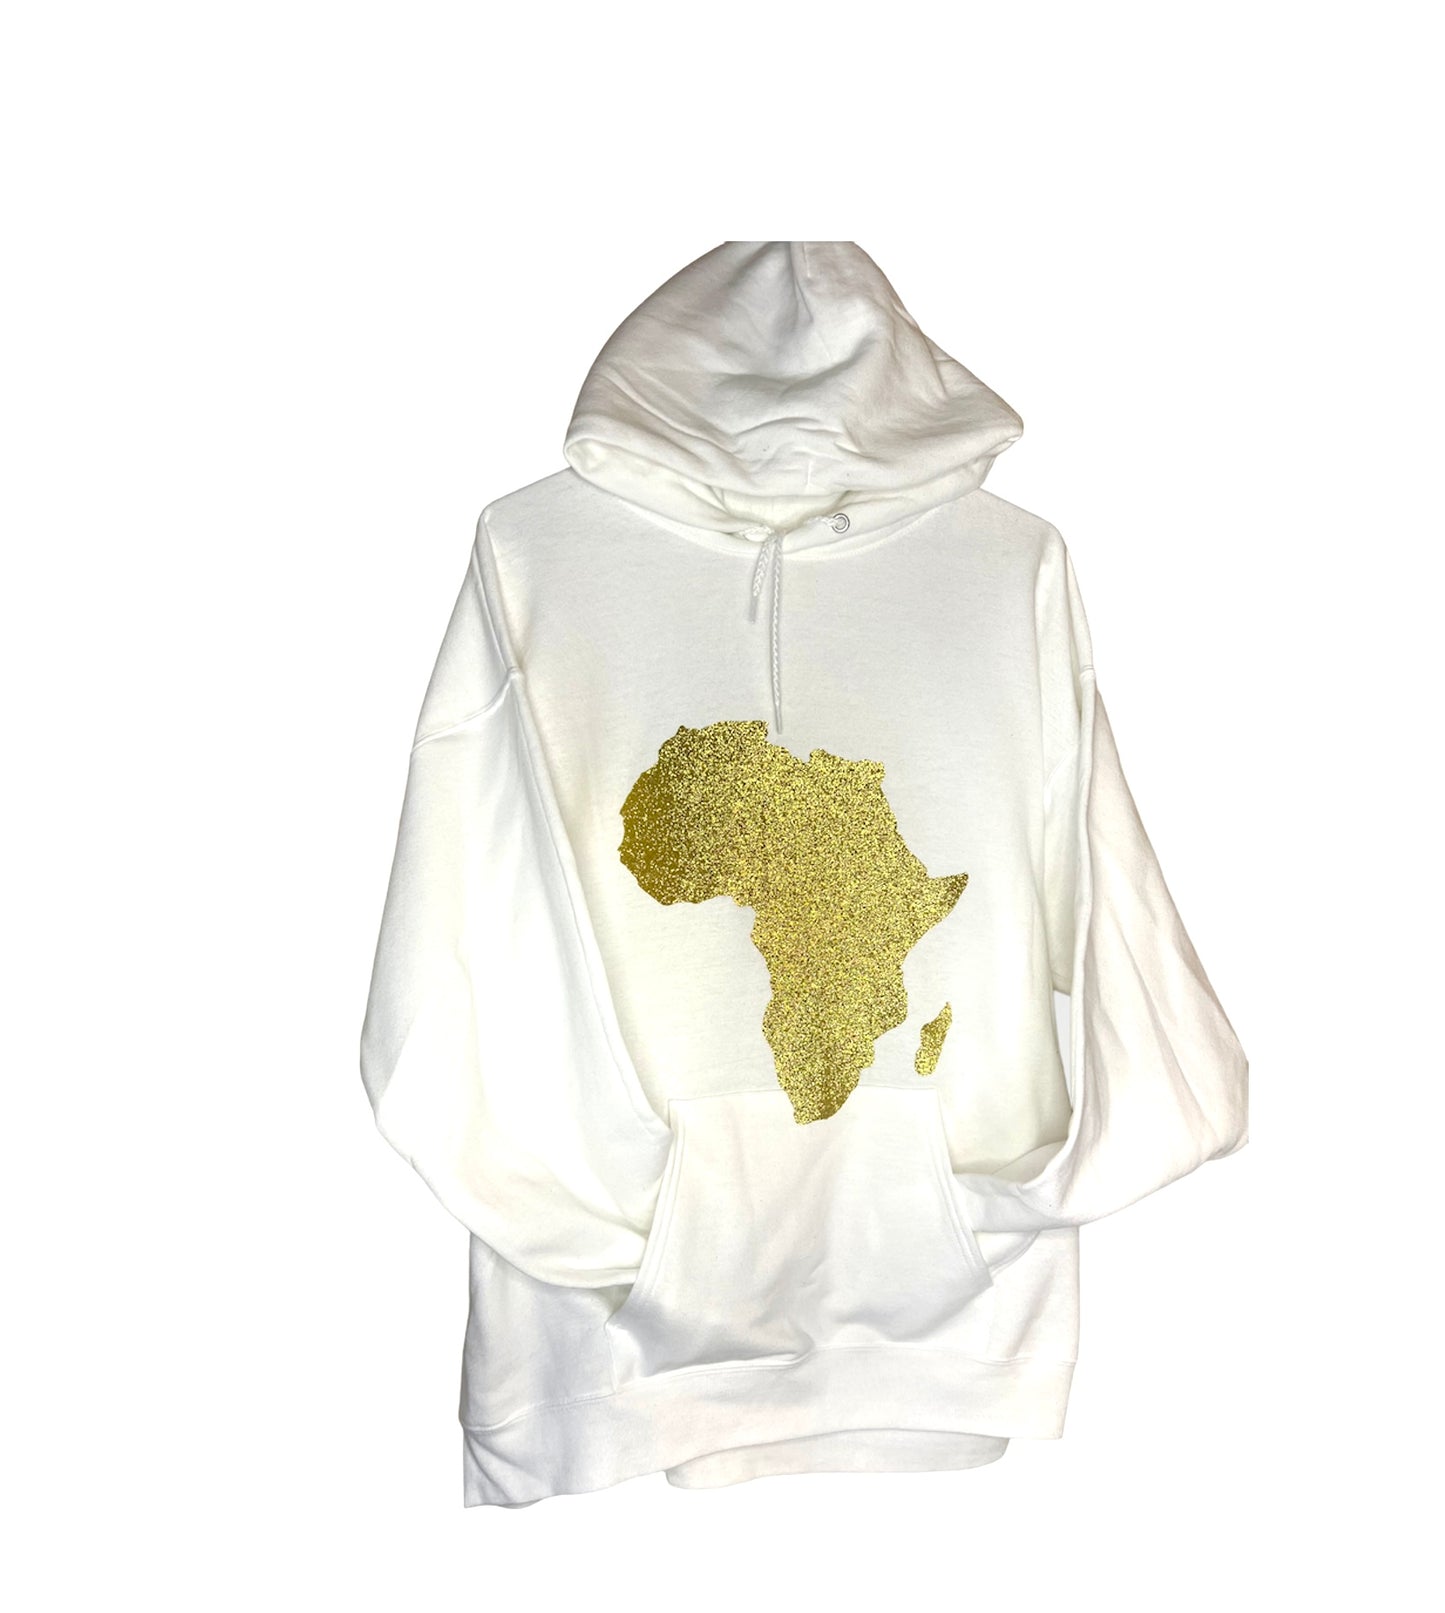 White Hoodie with Gold Africa Map